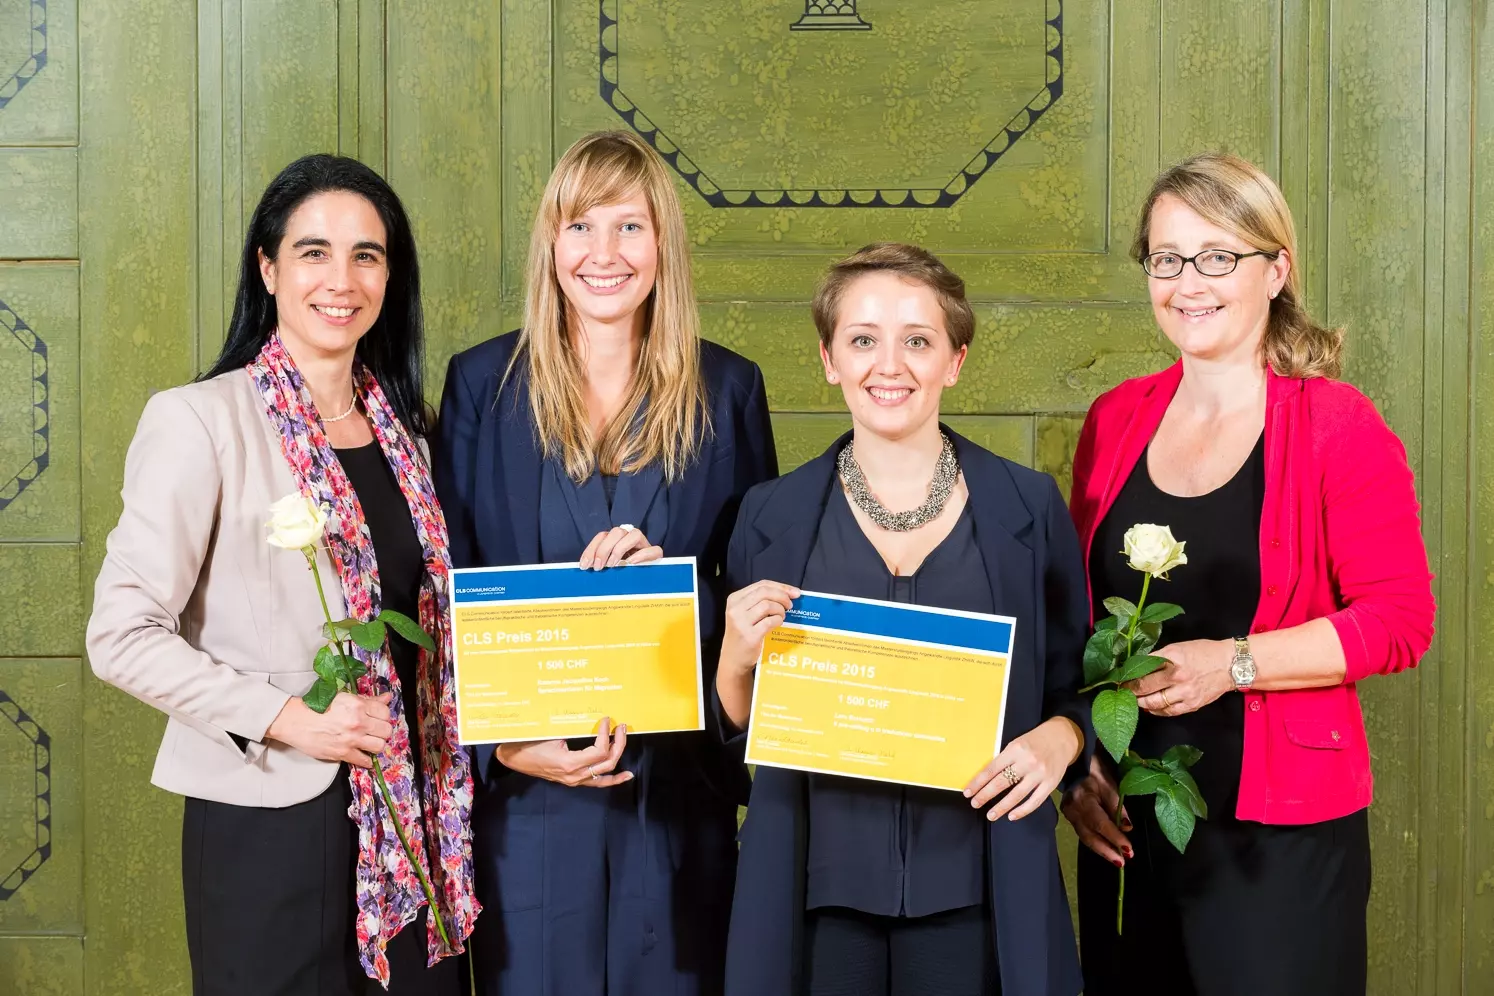 Elke Faundez and Christine Kamer Diehl from CLS Communication with the winners of the CLS prize for the best Master’s theses in the field of translation, Ramon Koch and Lara Bernardi.